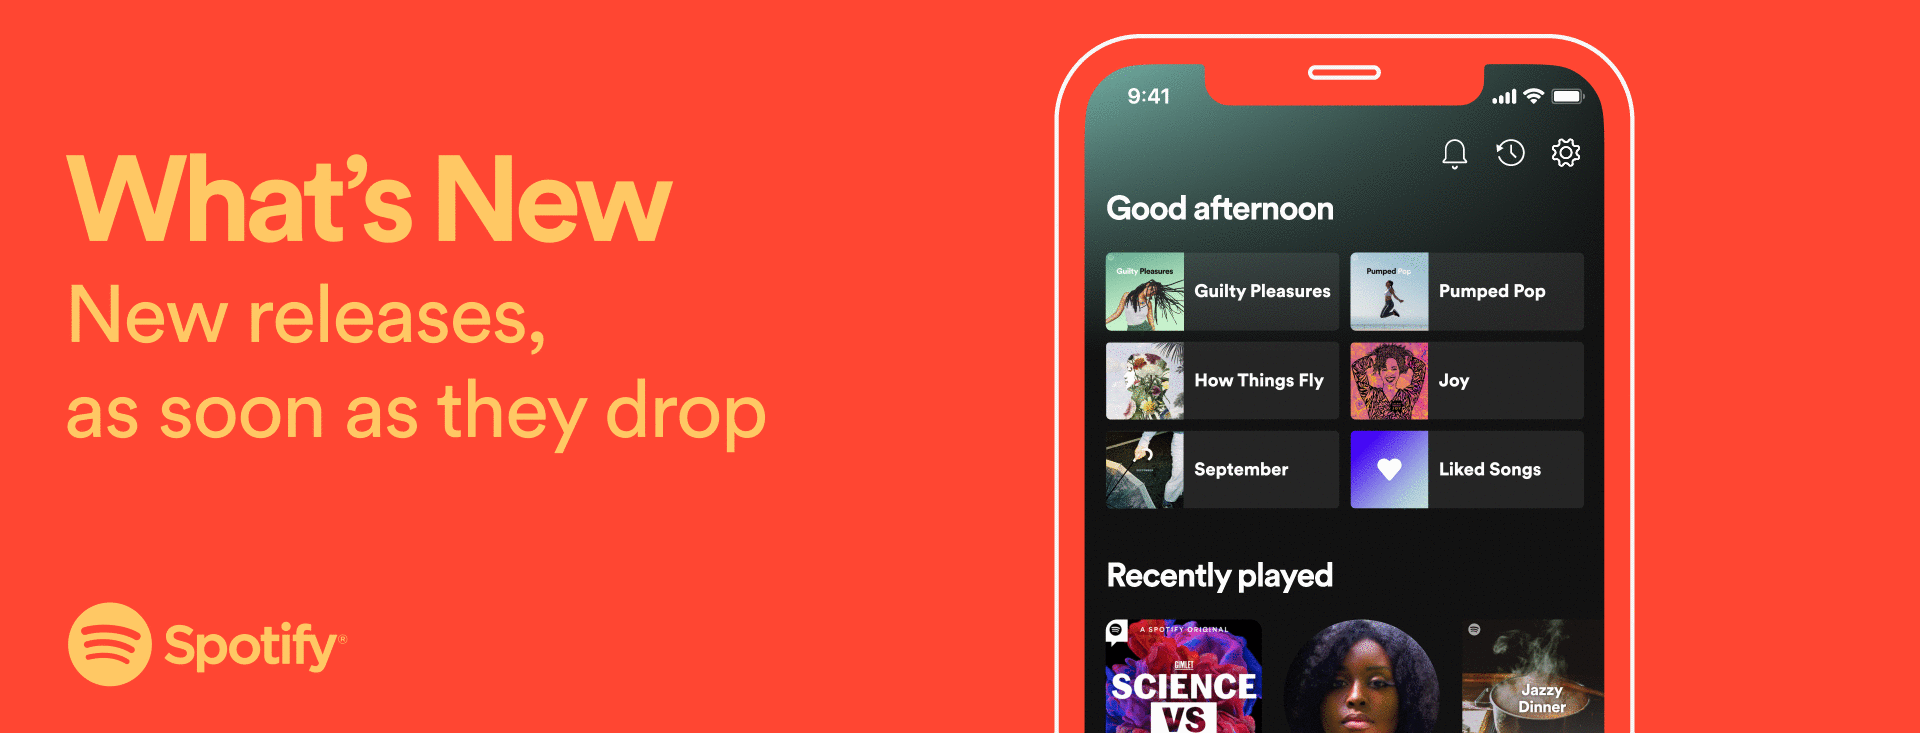 spotify what's new